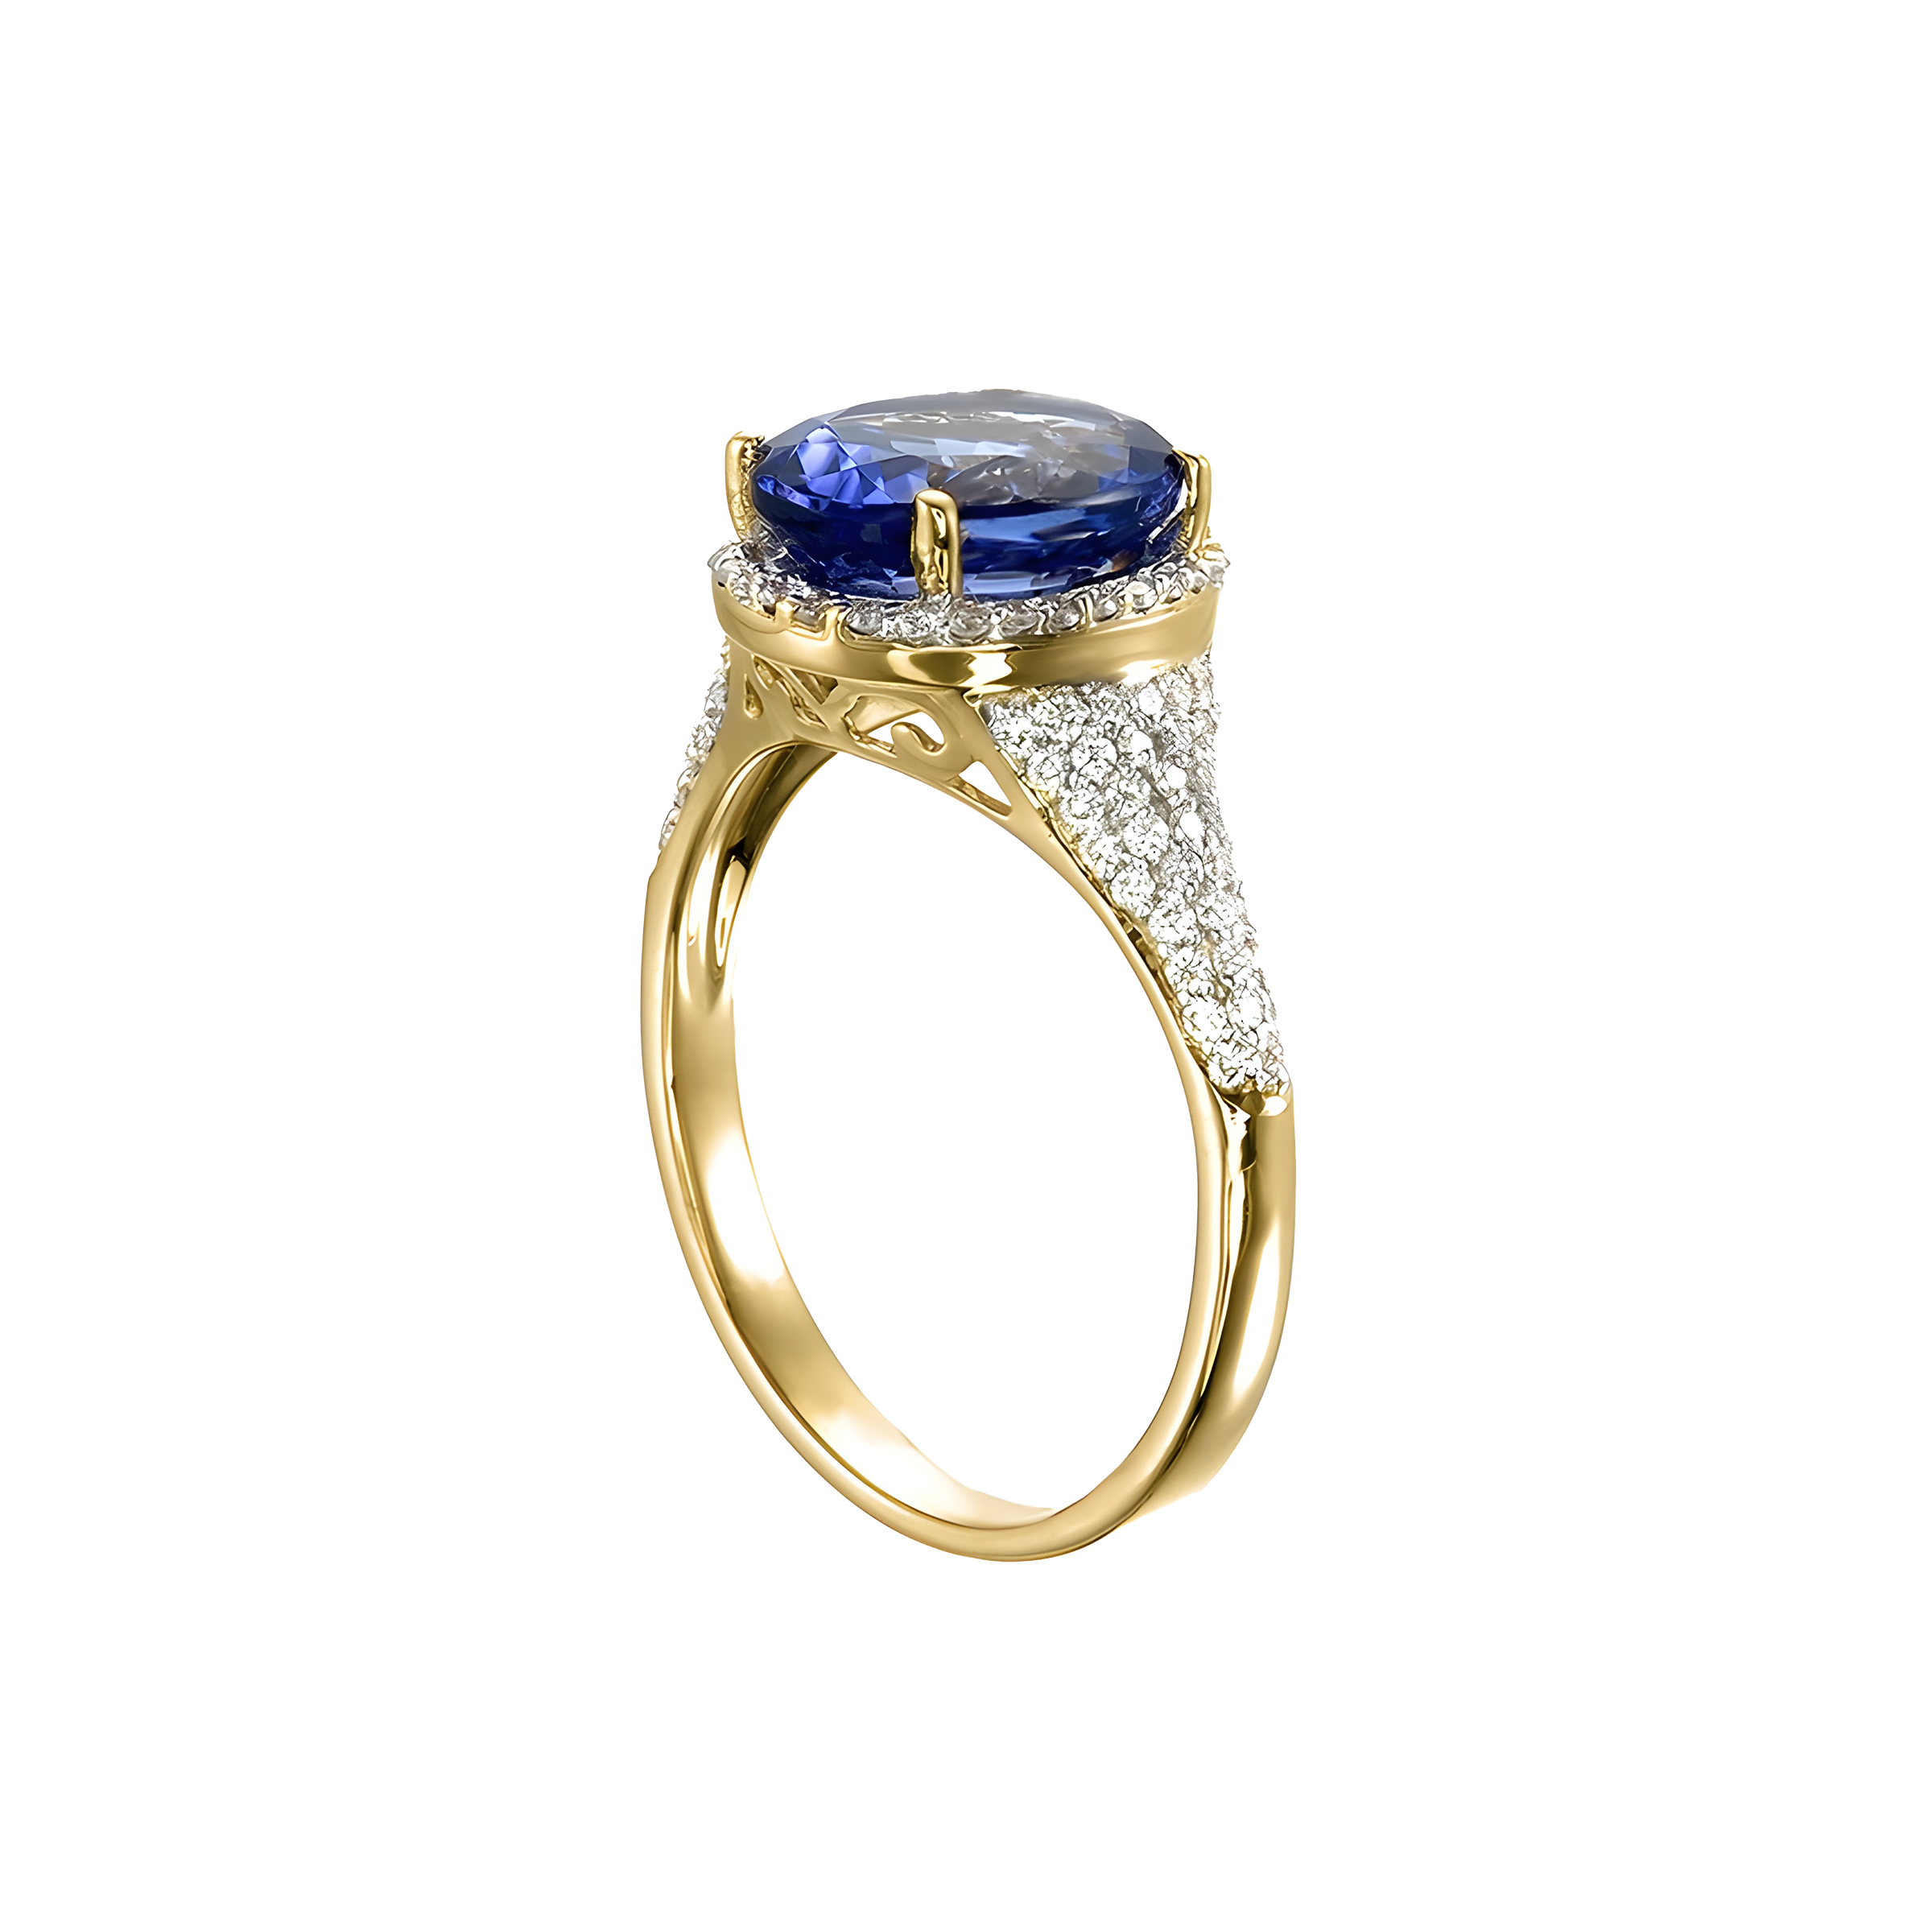 Oval Tanzanite and Diamond Ring in 18k Yellow Gold